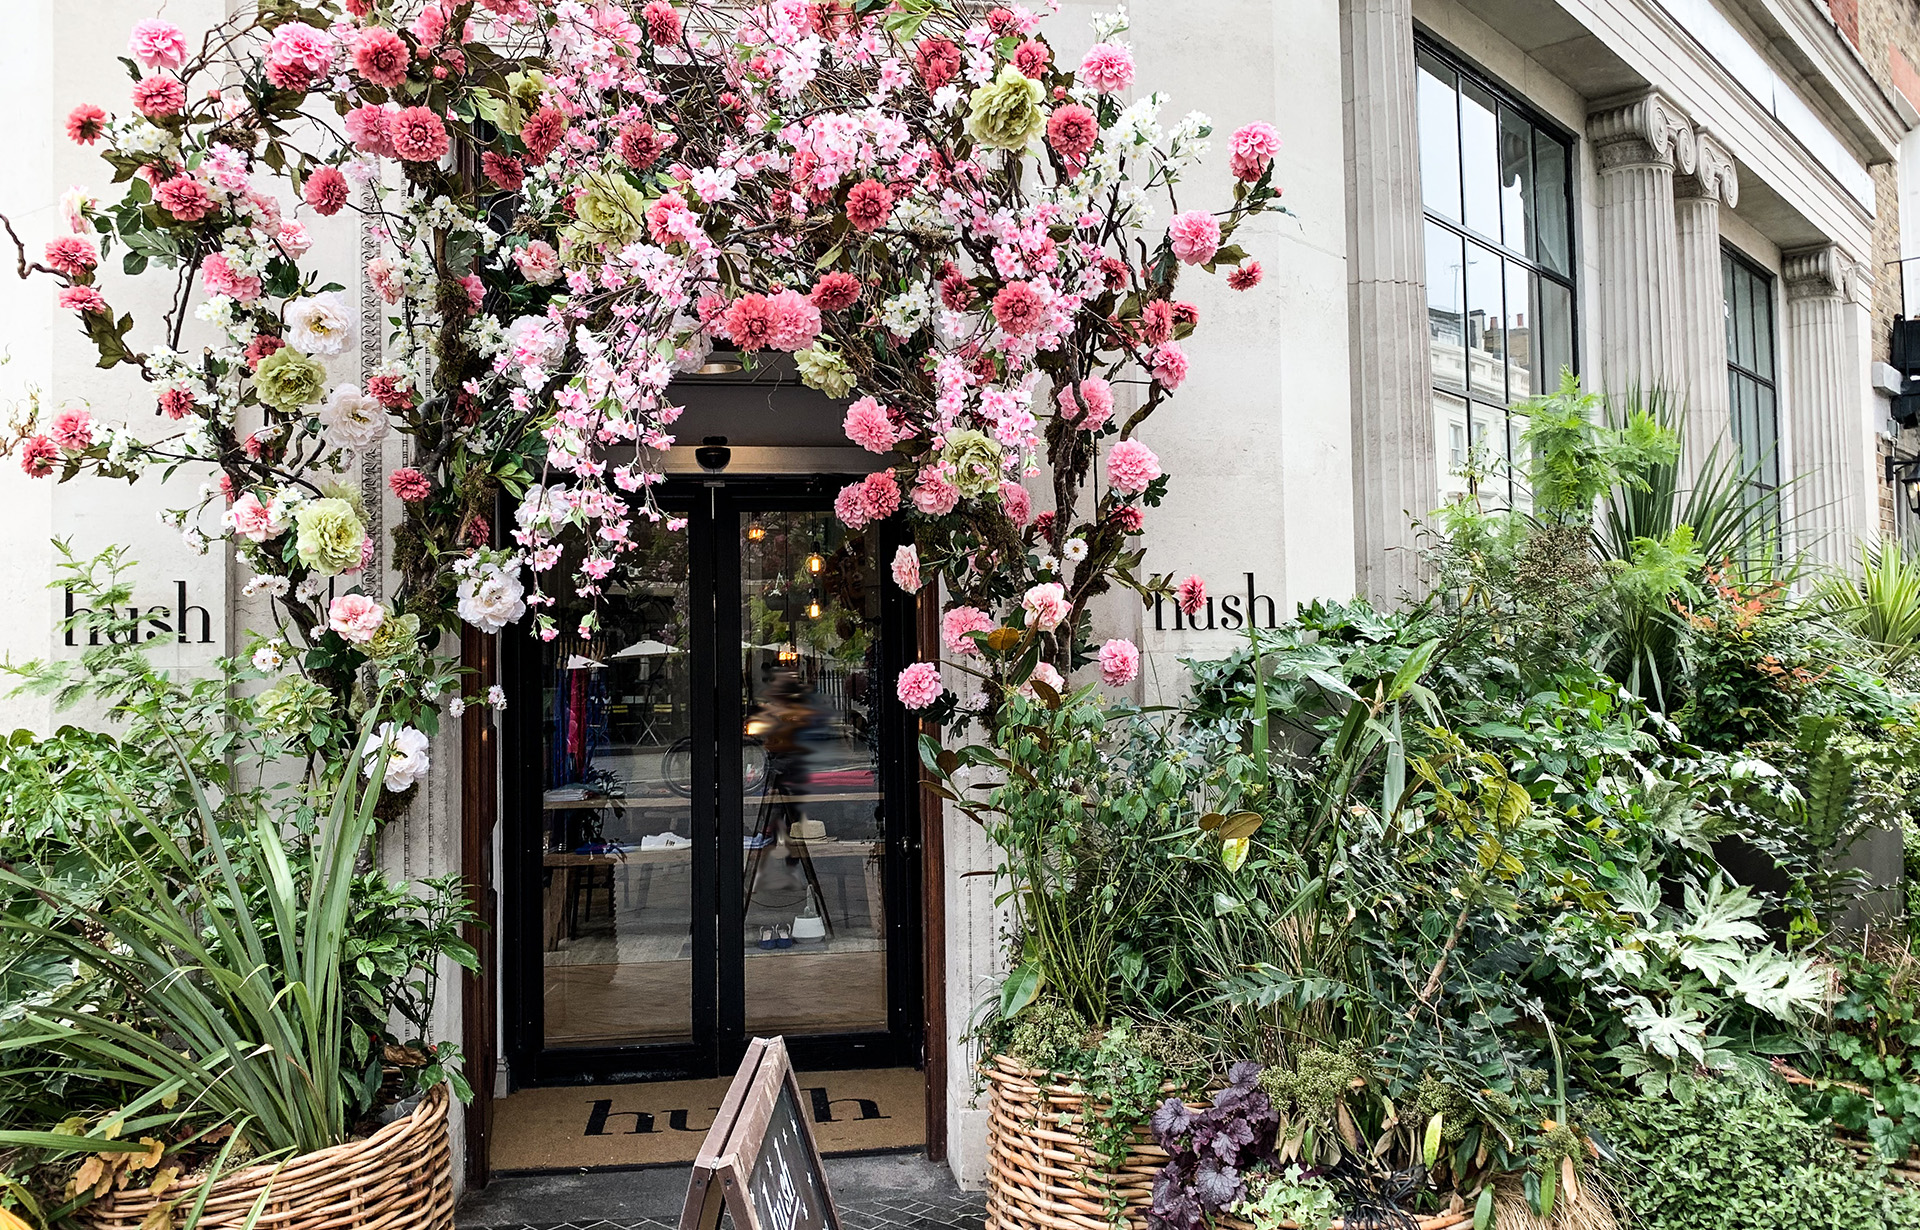 Storefront with beautiful pink flowers growing around and above the double door entrance - Header Image for the Rebrand One Blog Post